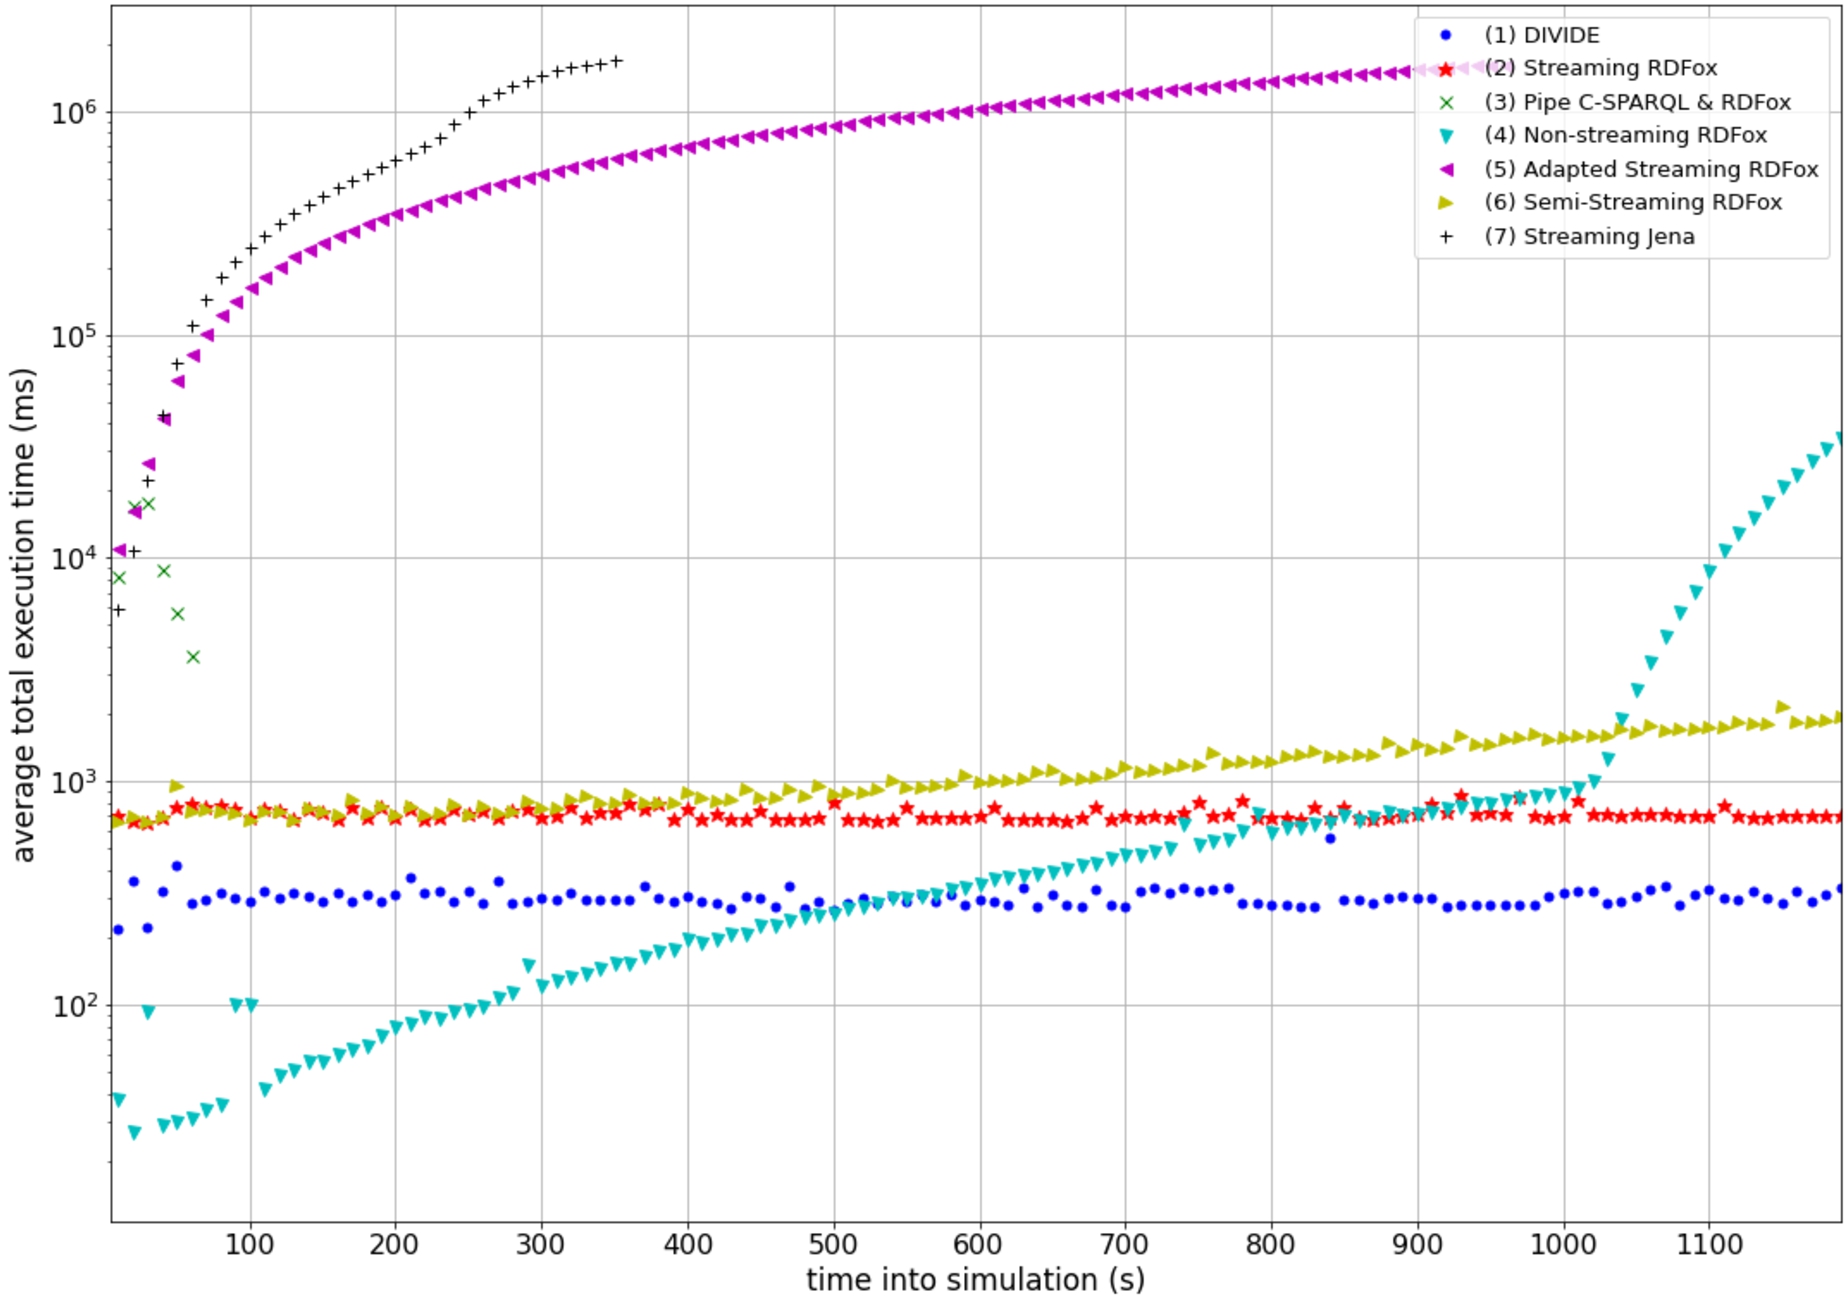 Results of the comparison of the DIVIDE real-time query evaluation approach with real-time reasoning approaches, for the showering query. For each evaluation set-up, the results show the evolution over time of the total execution time from the generated event (either a windowed event in a streaming set-up or an incoming event in a non-streaming set-up) until the routine activity prediction as output of the final query. For all set-ups, measurements are shown for the processed event, either incoming or windowed, at every 10 seconds. All plotted execution times are averaged over the evaluation runs.